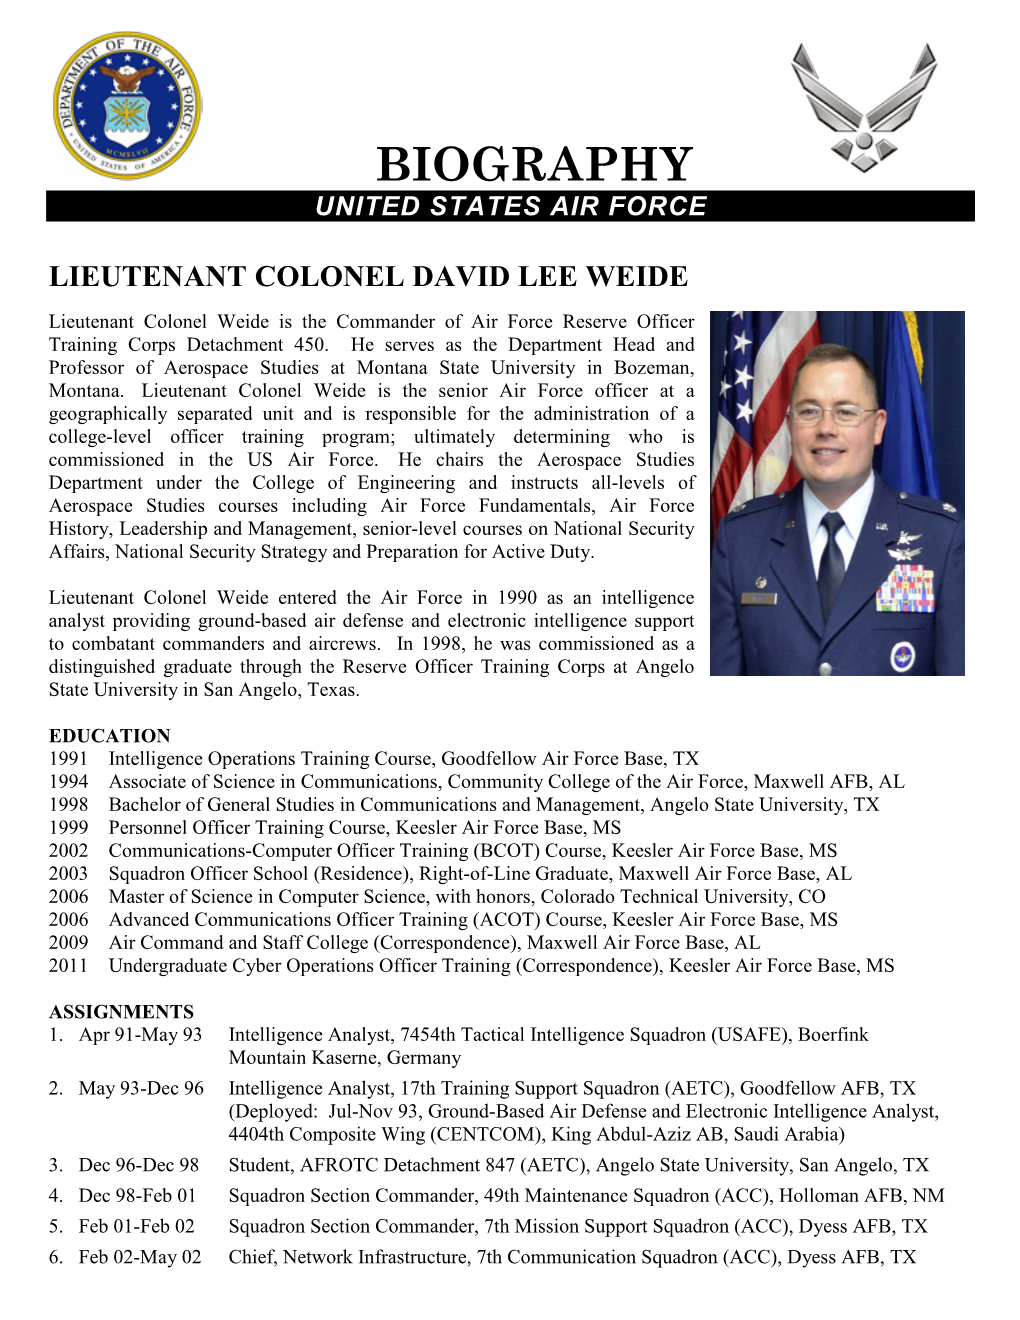 Biography United States Air Force